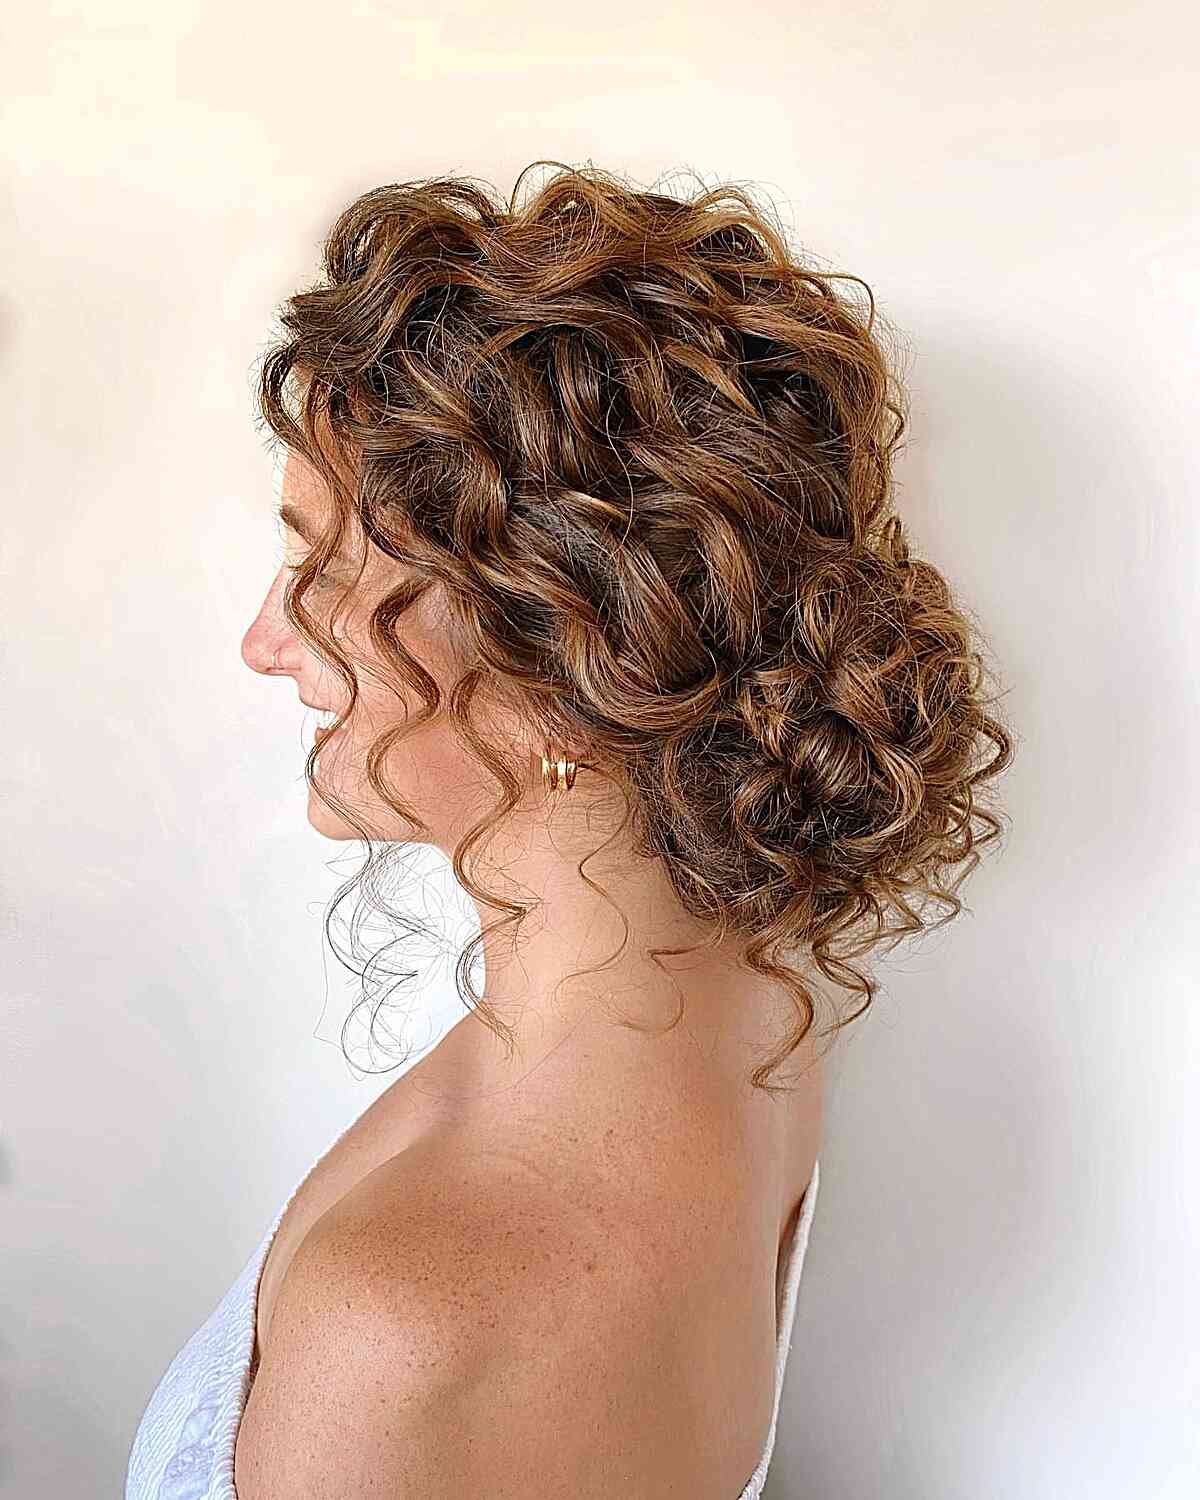 Stunning Updo for Curls and women with longer hair